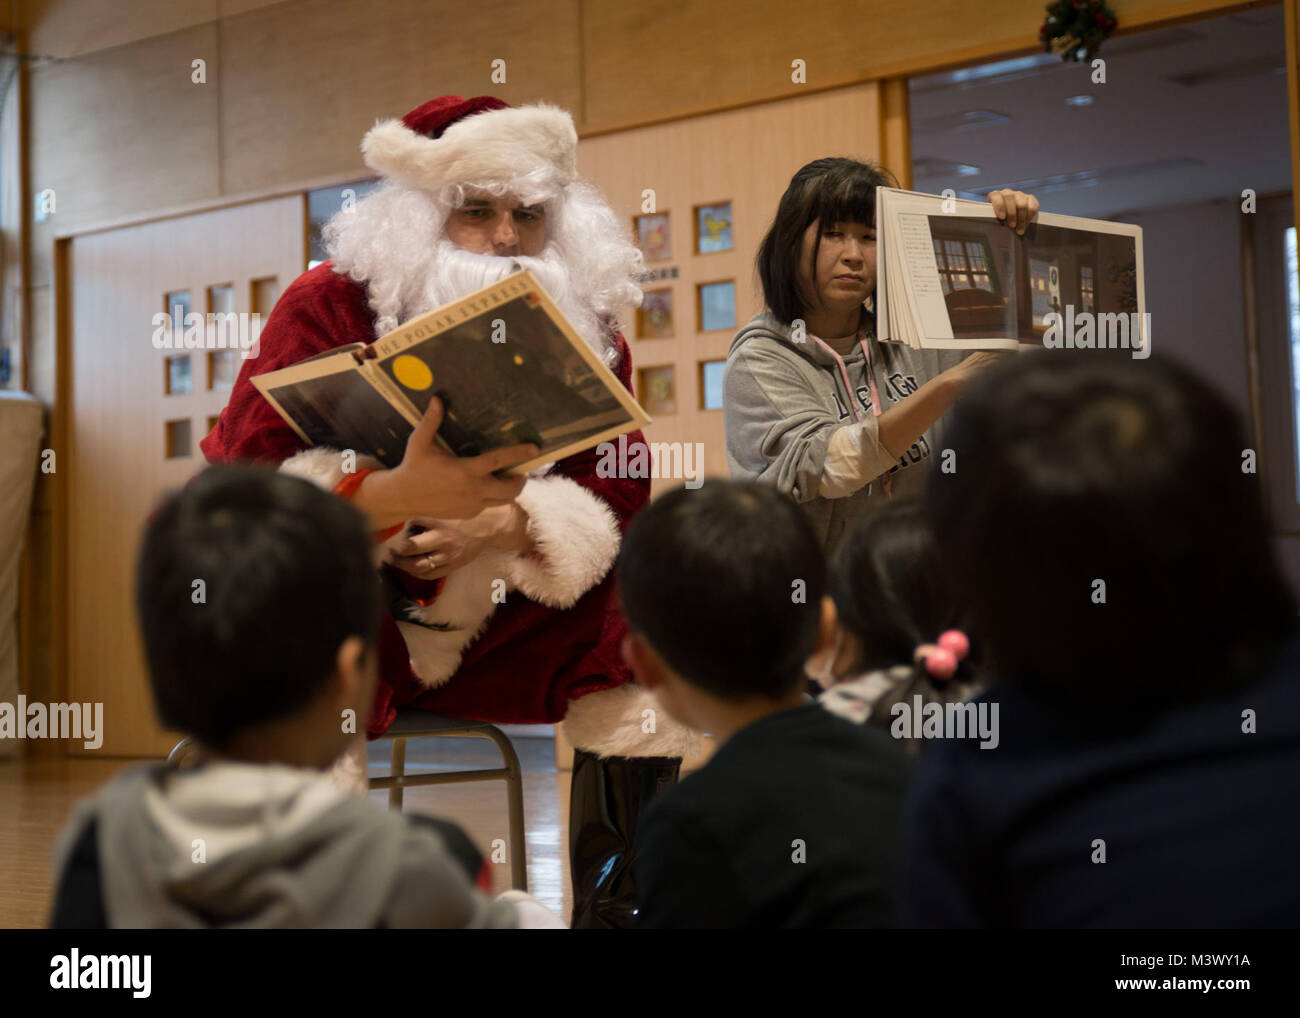 171218-N-DA275-058 MISAWA, Japan (Dec. 18, 2017) Legalman 1st Class Donald McDowell, assigned to Naval Air Facility Misawa (NAFM), visits children at the Ohzora Jido-Kan, a Japanese after school care center, dressed as Santa Claus for a special holiday themed visit. Sailors from NAFM volunteer to make bi-weekly visits to the after school care center as part of community relations efforts. (U.S. Navy photo by Mass Communication Specialist 3rd Class Samuel Bacon/Released) 171218-N-DA275-058 by Photograph Curator Stock Photo